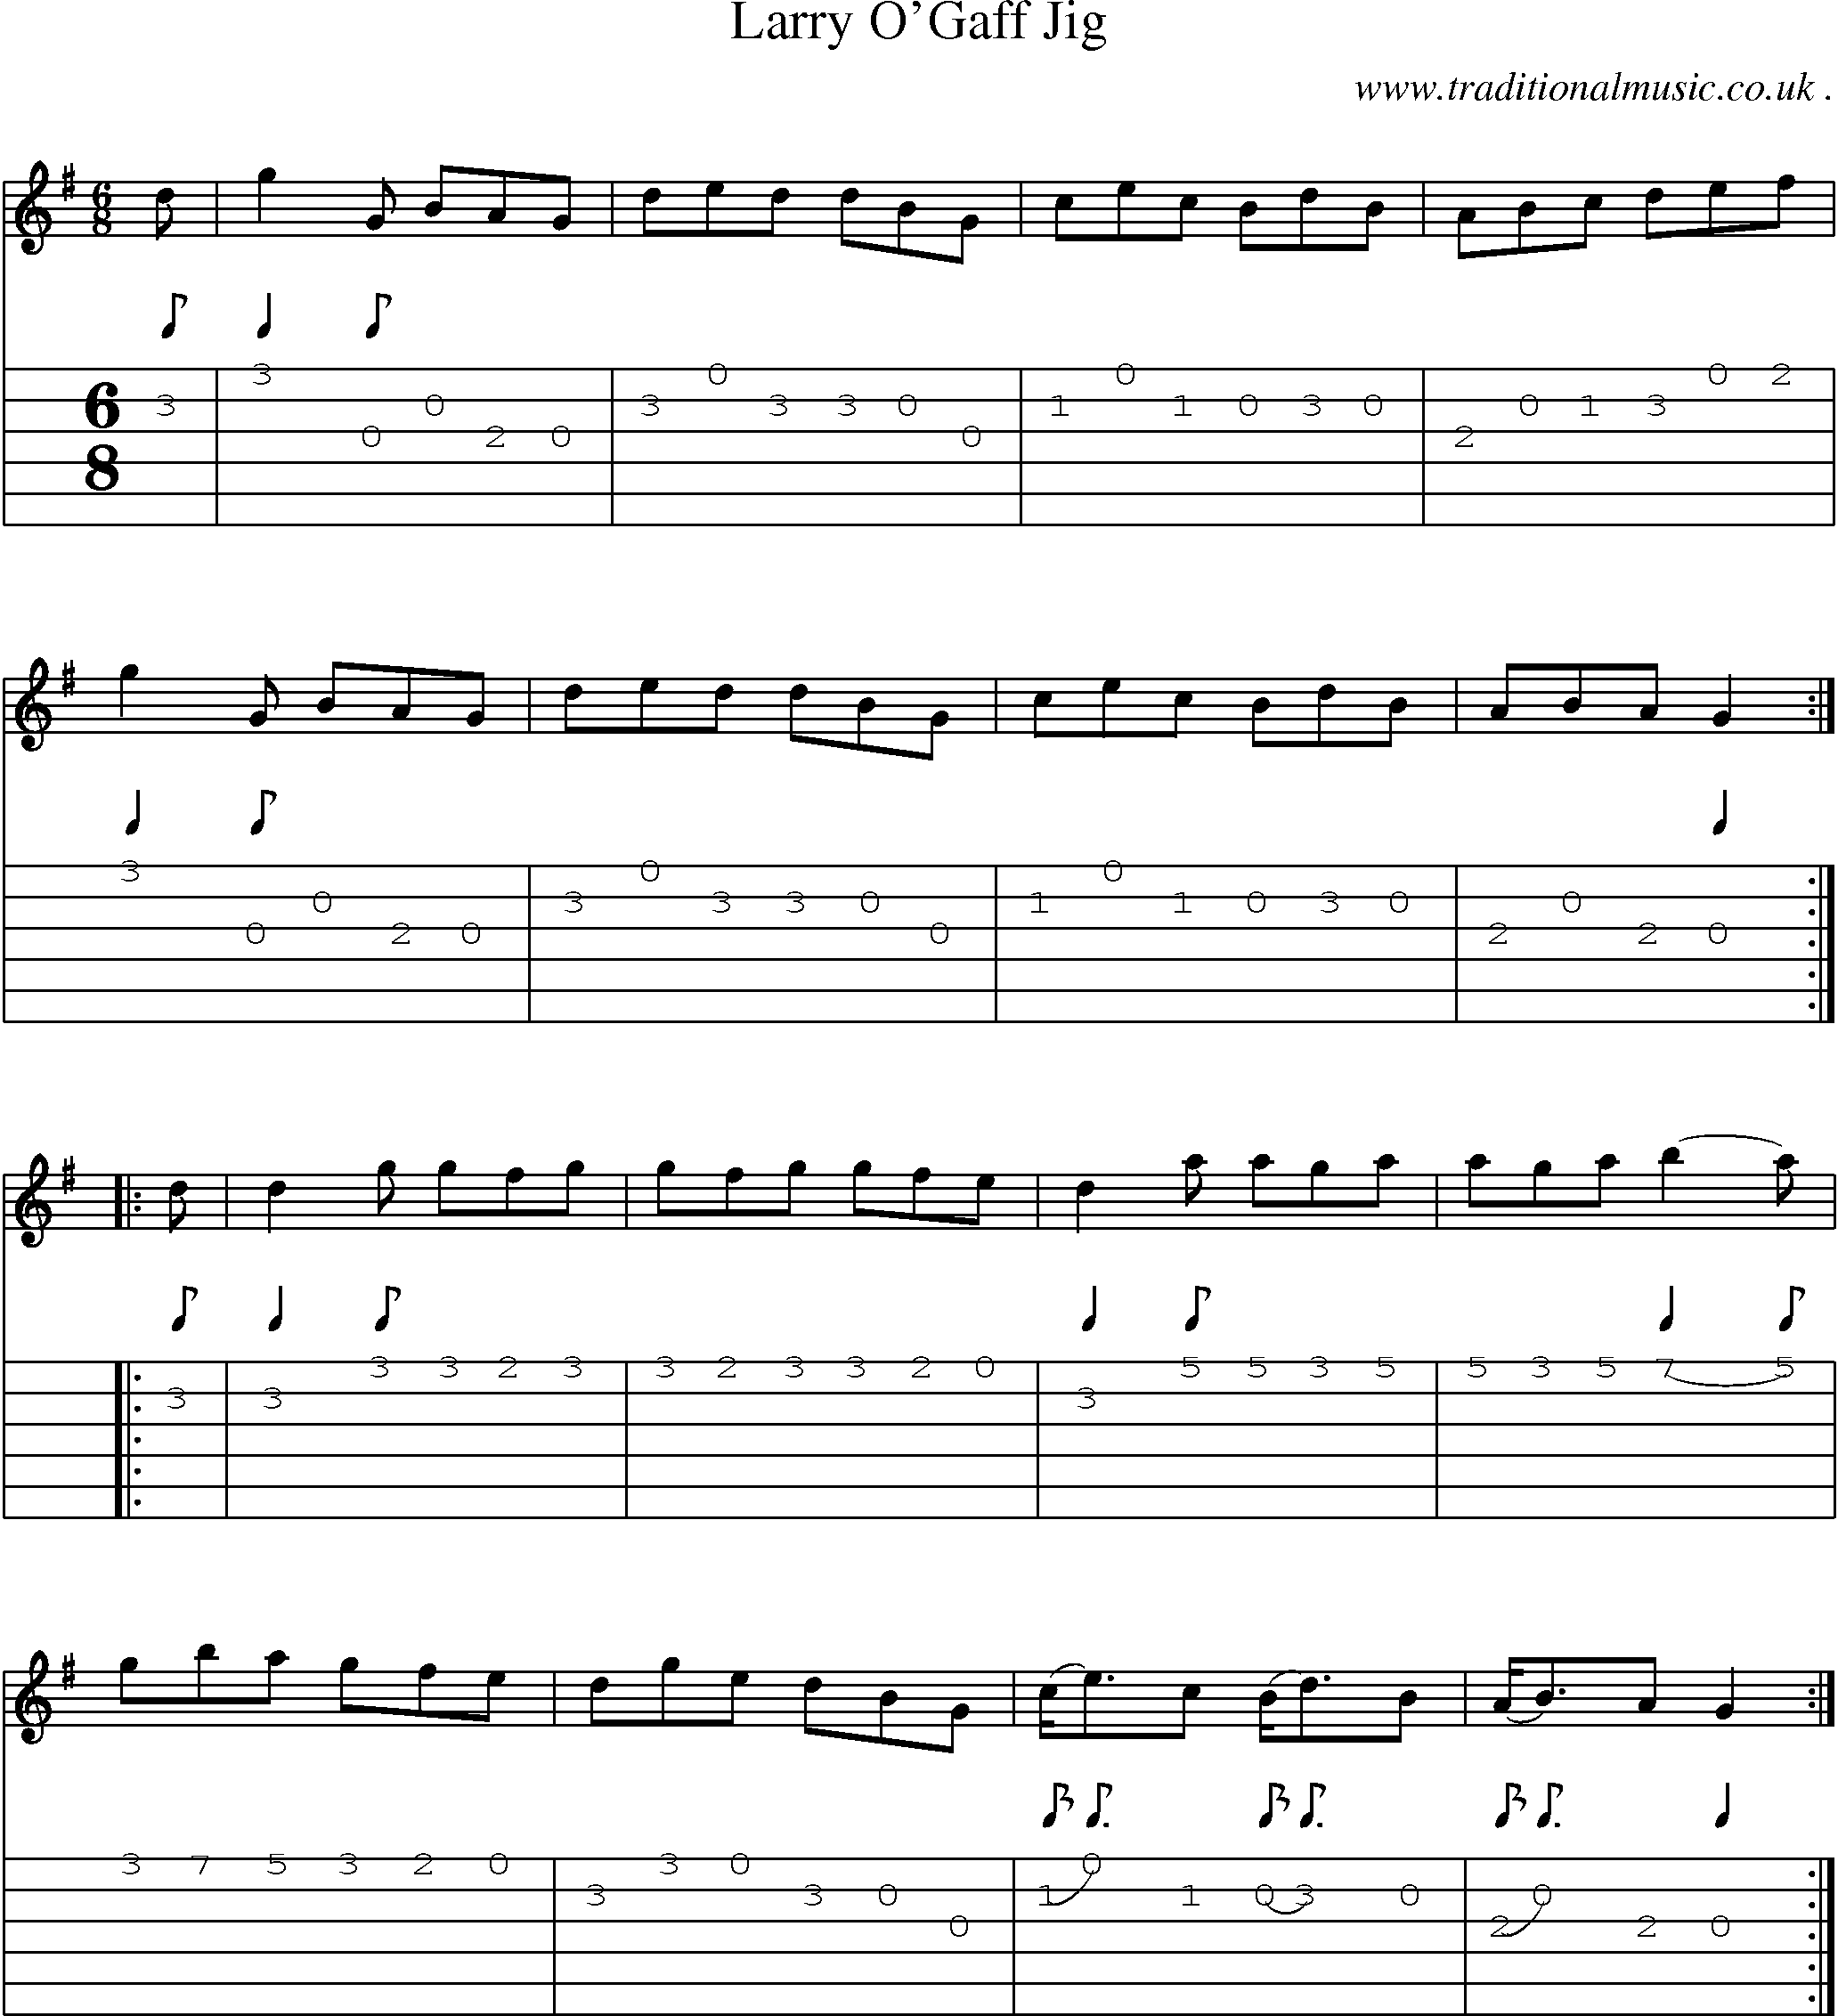 Sheet-Music and Guitar Tabs for Larry Ogaff Jig